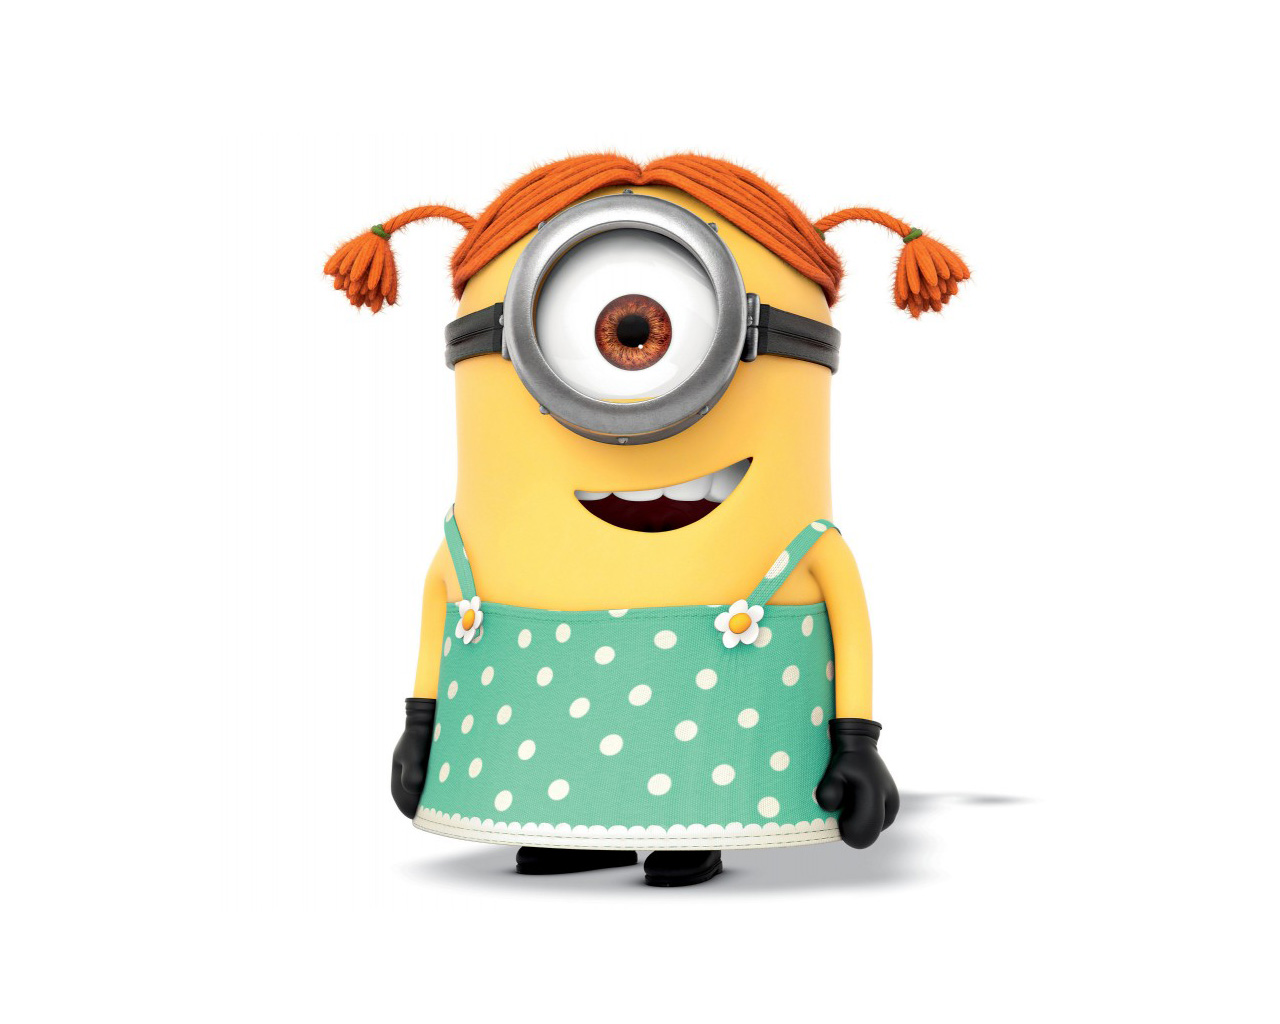 Amazoncom: Despicable Me 2: Steve Carell, Russell Brand